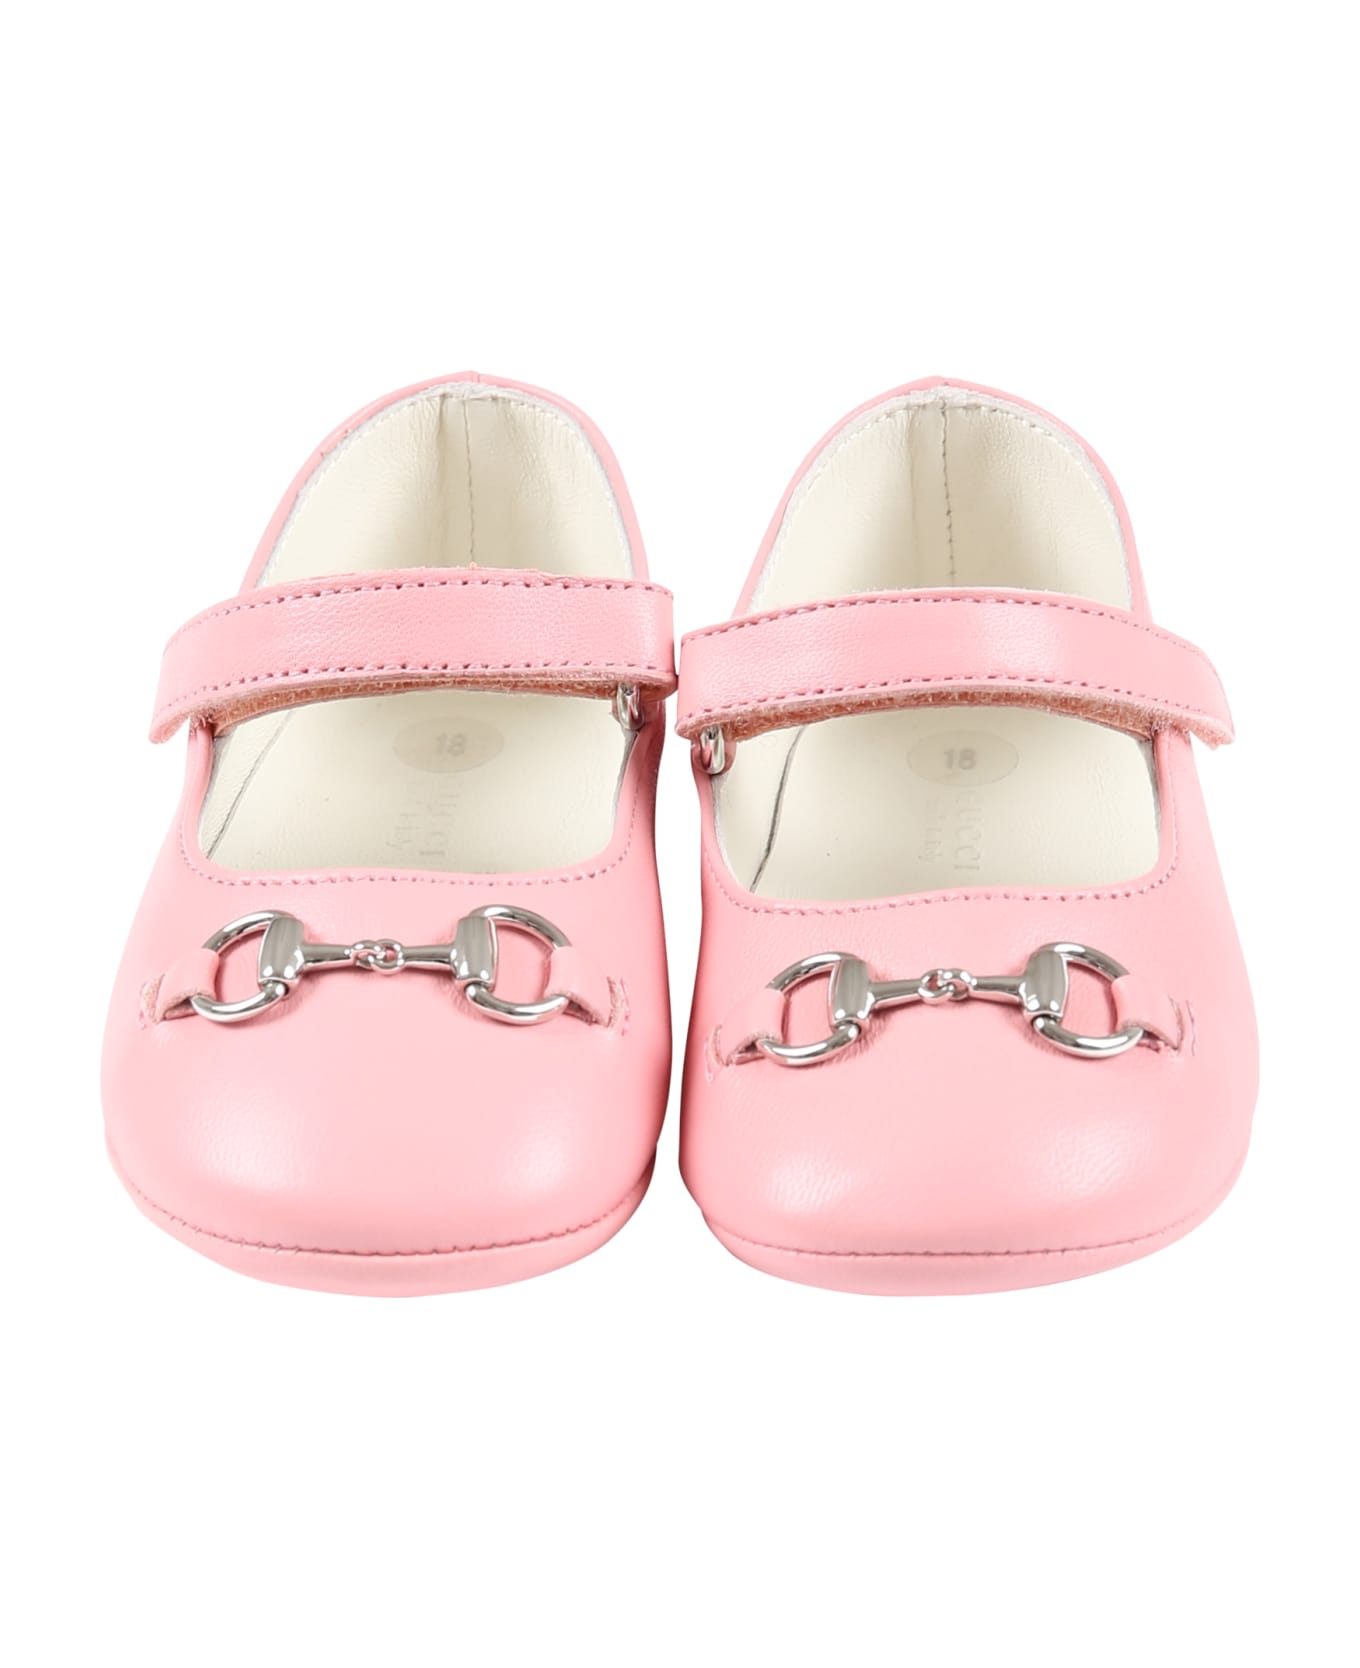 Gucci Pink Ballet-flats For Baby Girl With Horsebit - Pink シューズ